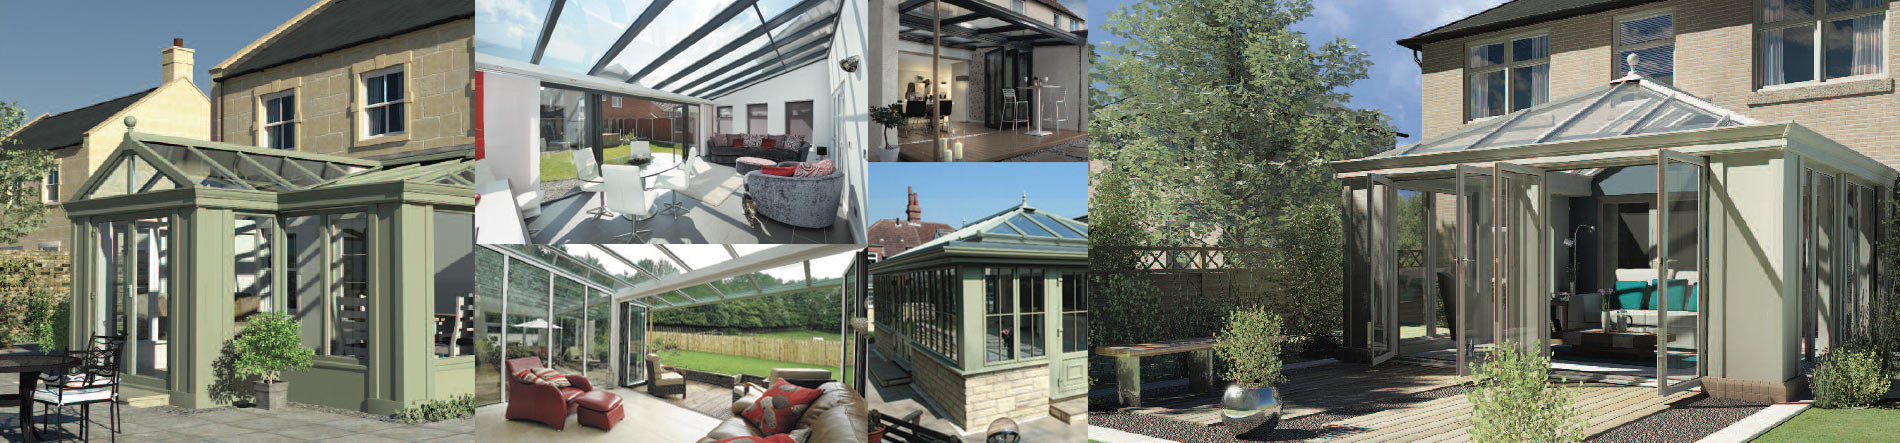 collage image of houses with both solar panels and extensions